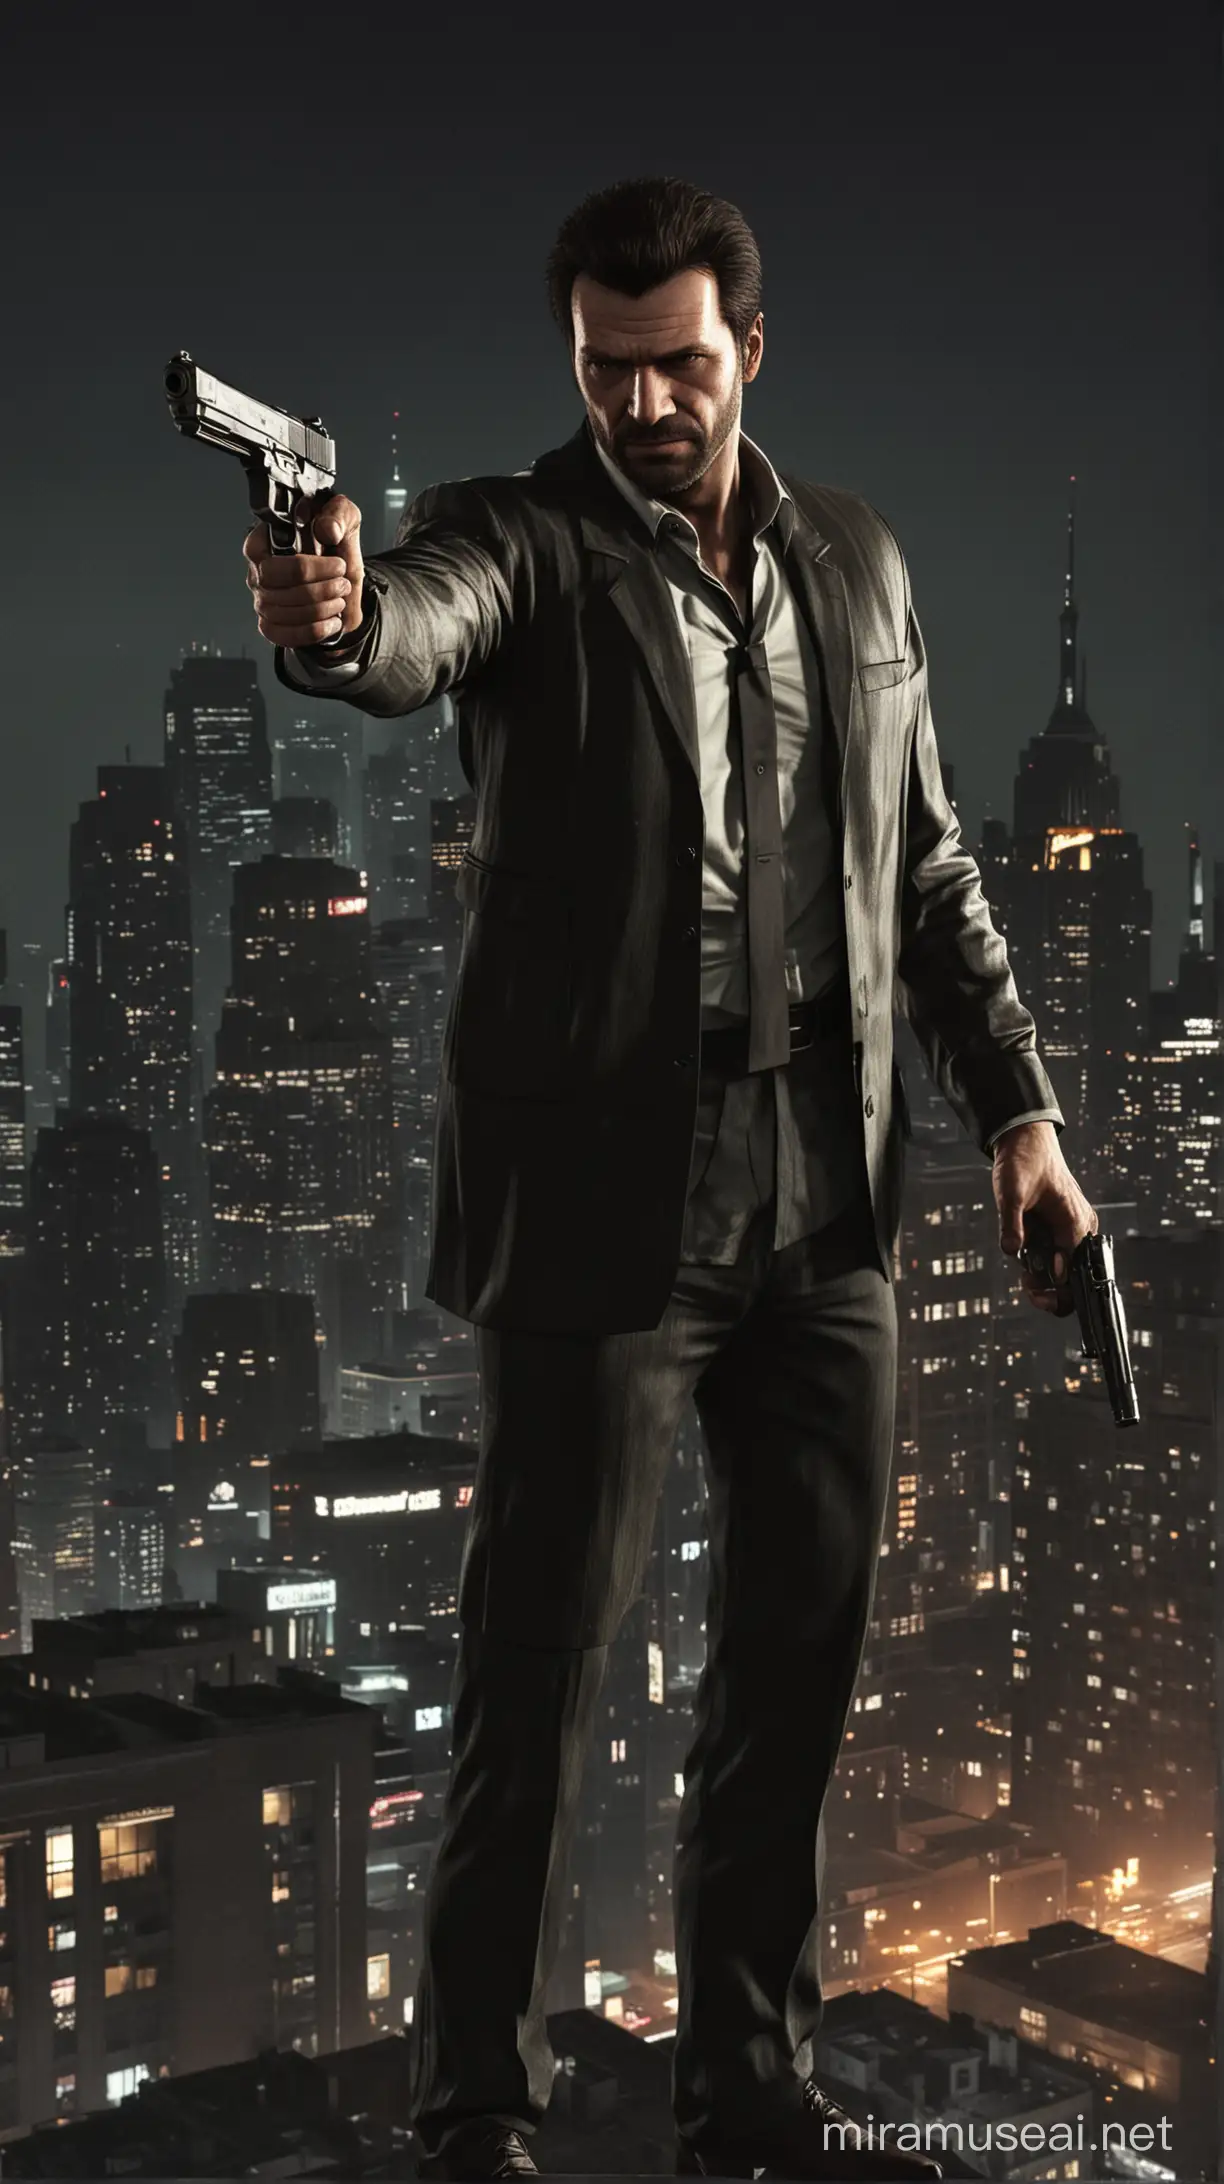 Max payne 3 holding a pistol on a rooftop newyork at night 